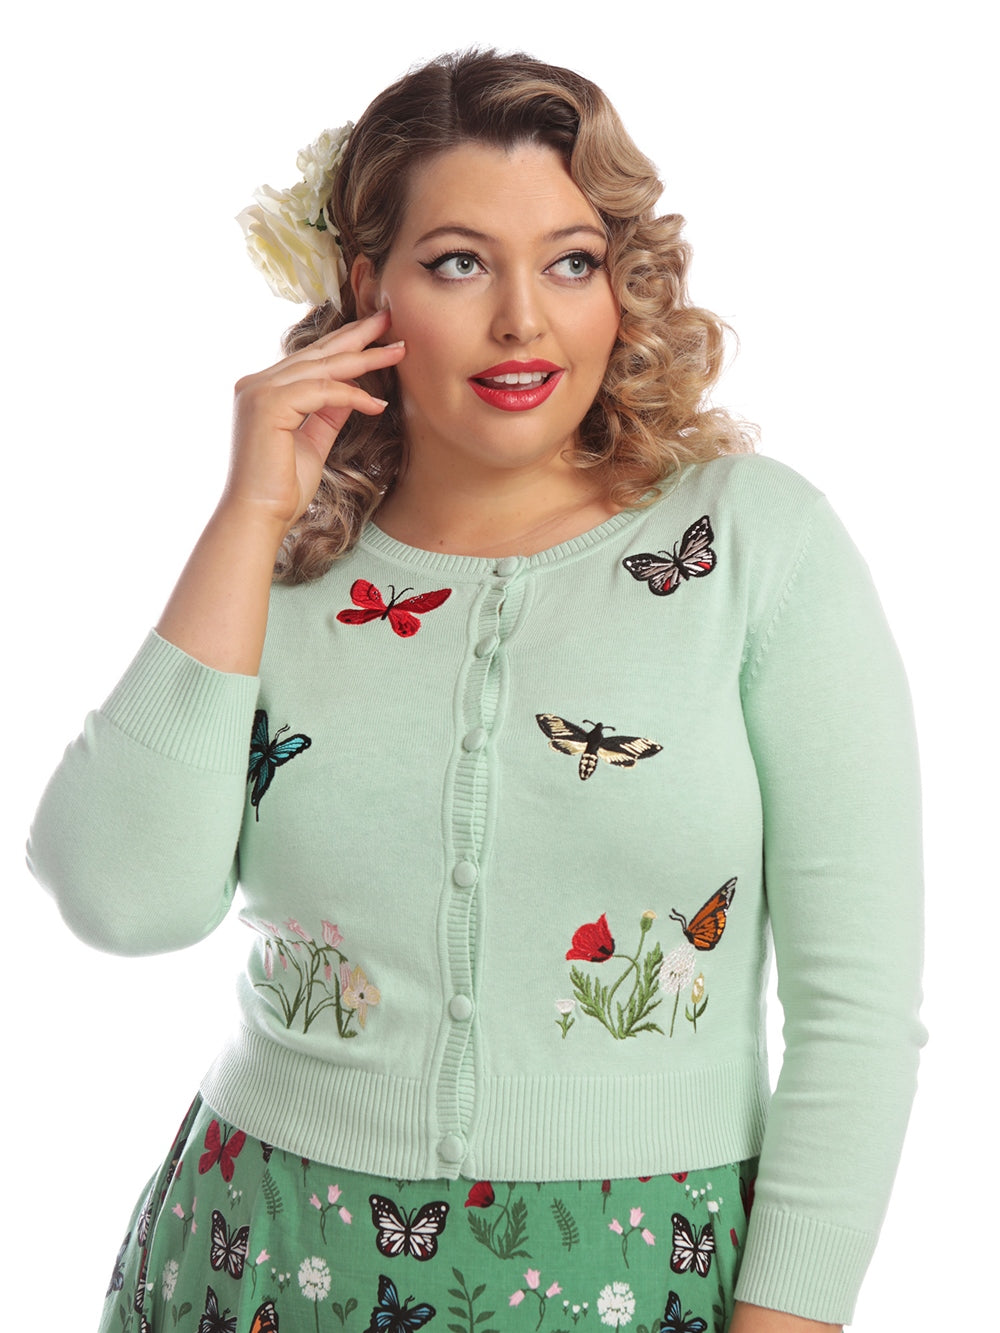 pretty model gazes into the distance while wearing a mint green cardigan with colourful butterflies and flowers embroidered on the front